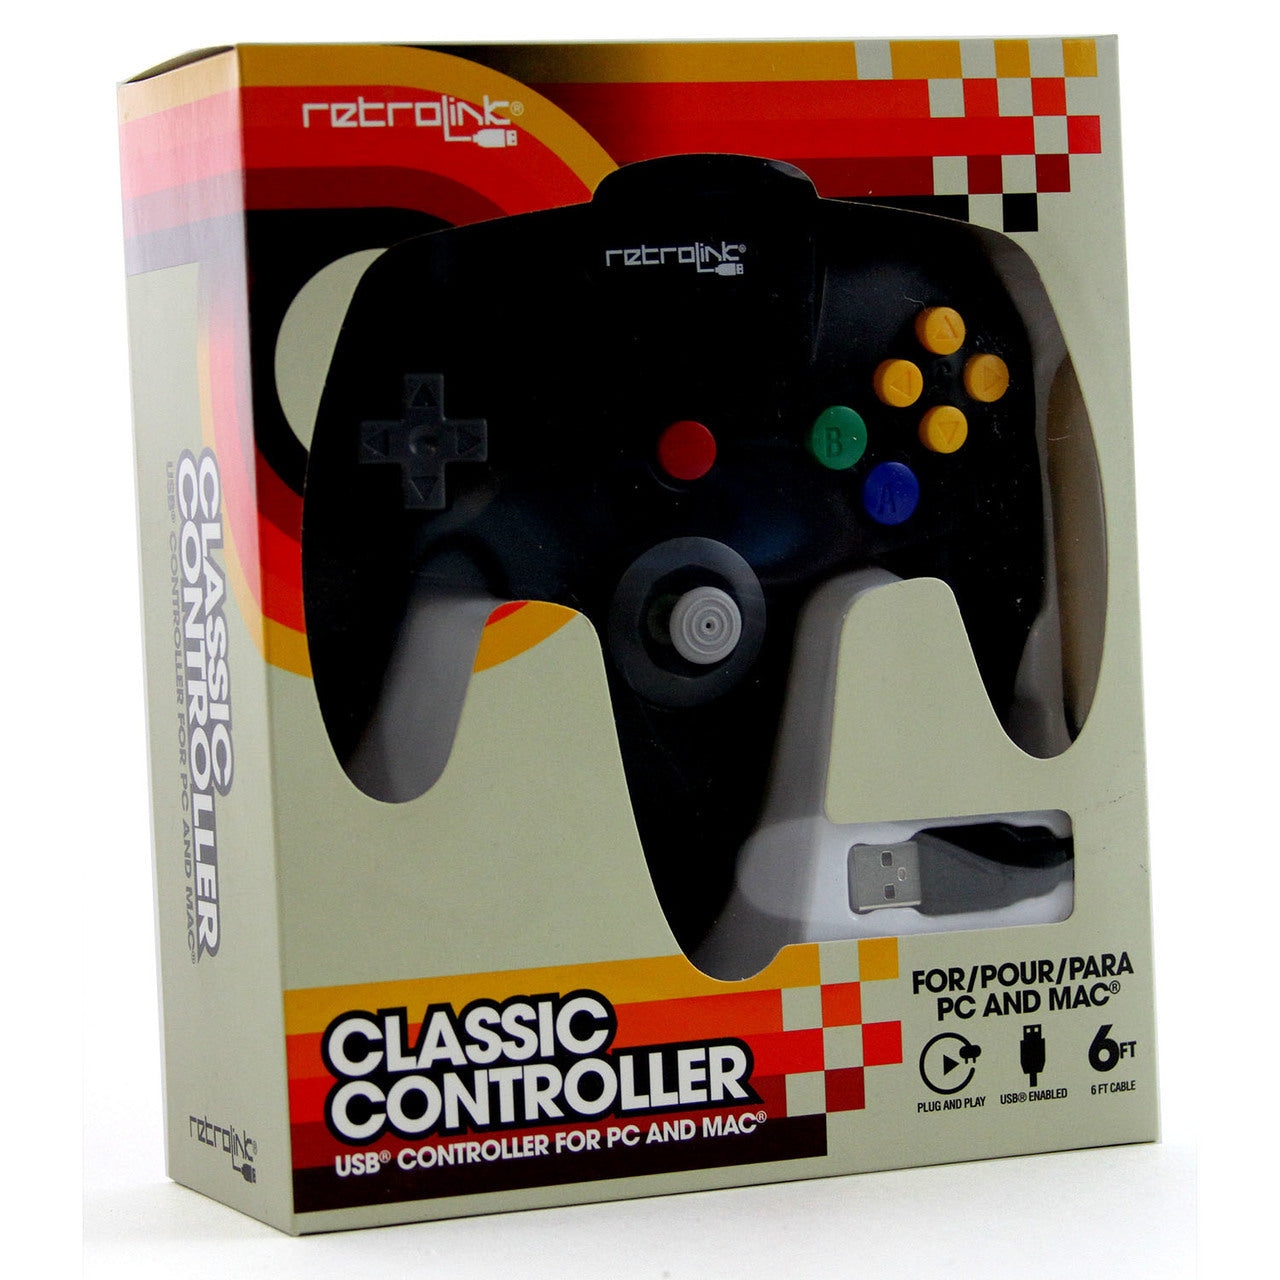 Retrolink Nintendo 64 Classic USB Enabled Wired Controller for PC and MAC,  Black (33dade51ea29e6ab013b0c4a0c136ca5) - PCPartPicker